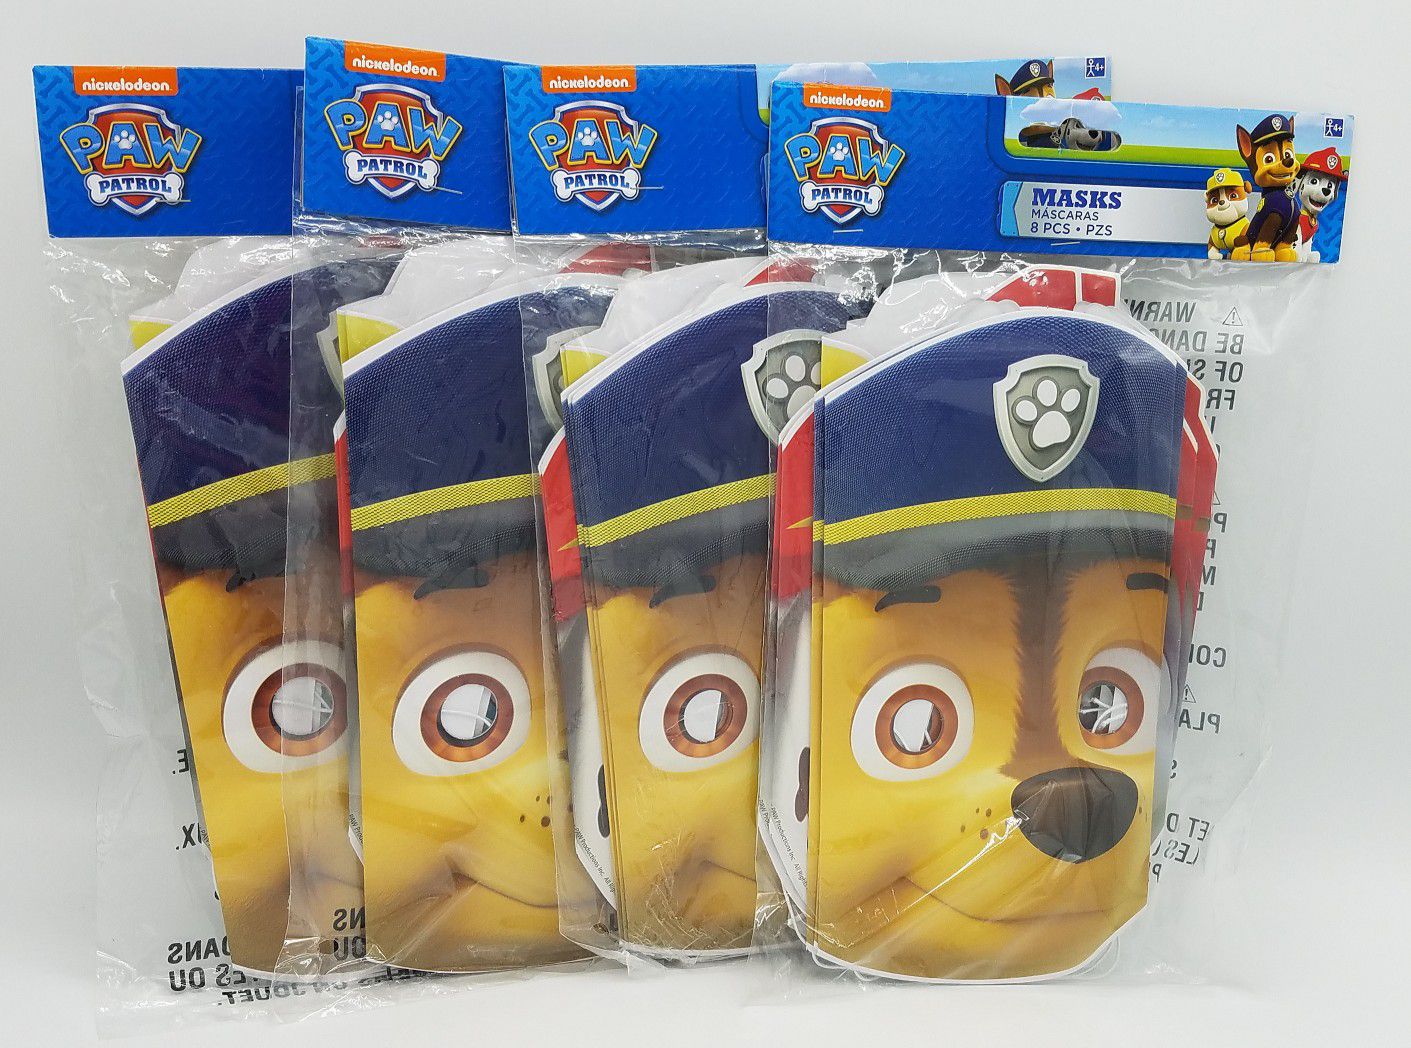 BRAND NEW!! 4 packs of Paw Patrol Party Masks! (8 masks in each pack)